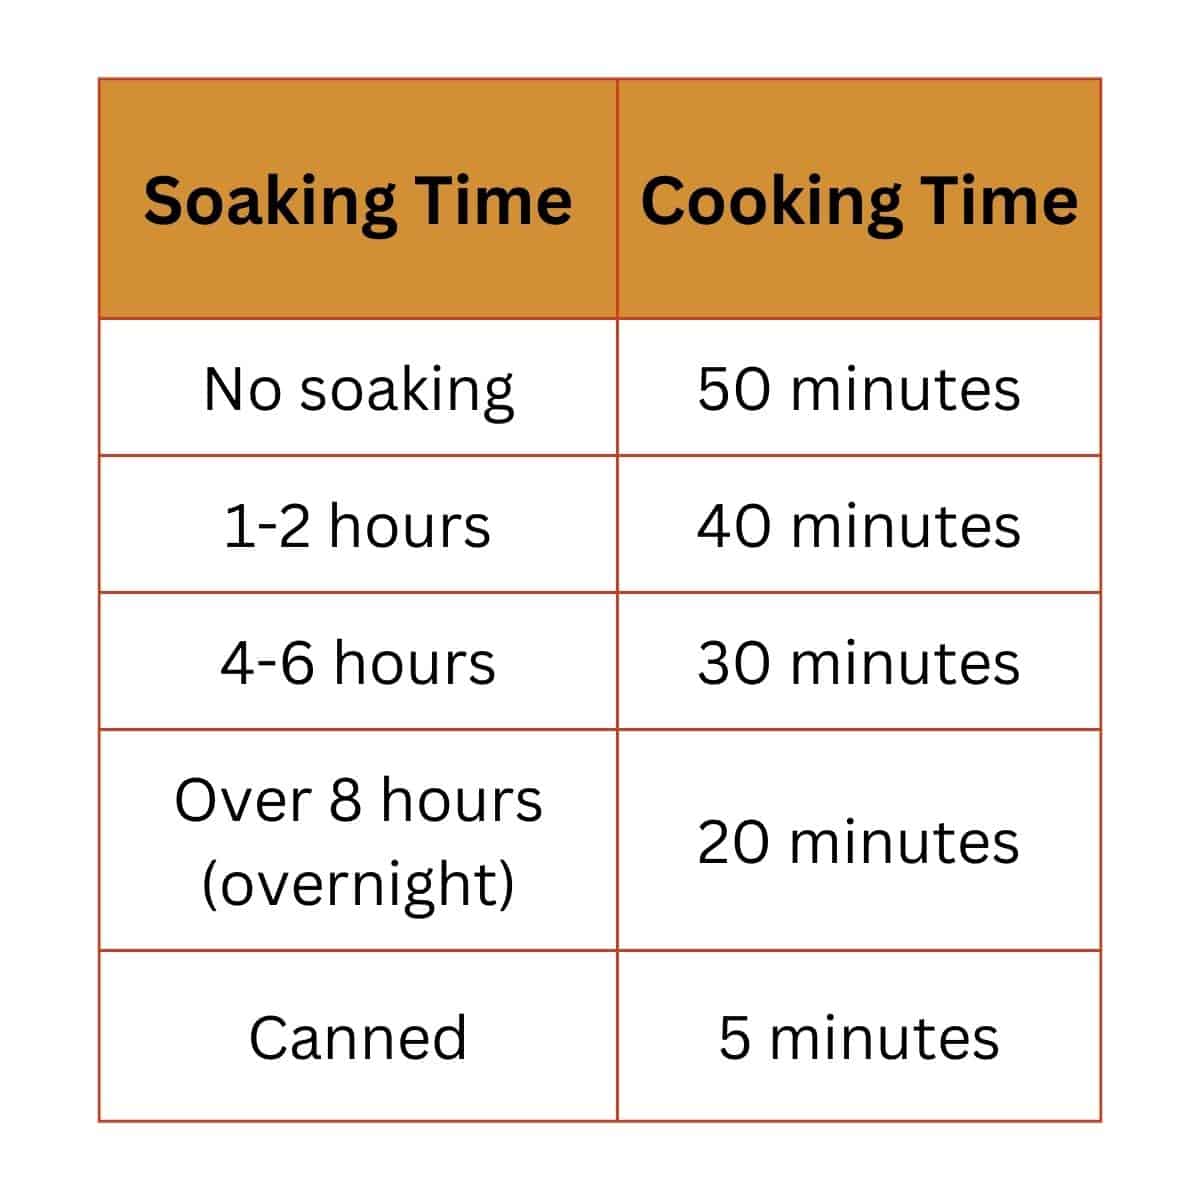 Adjust cooking time according to soaking time.